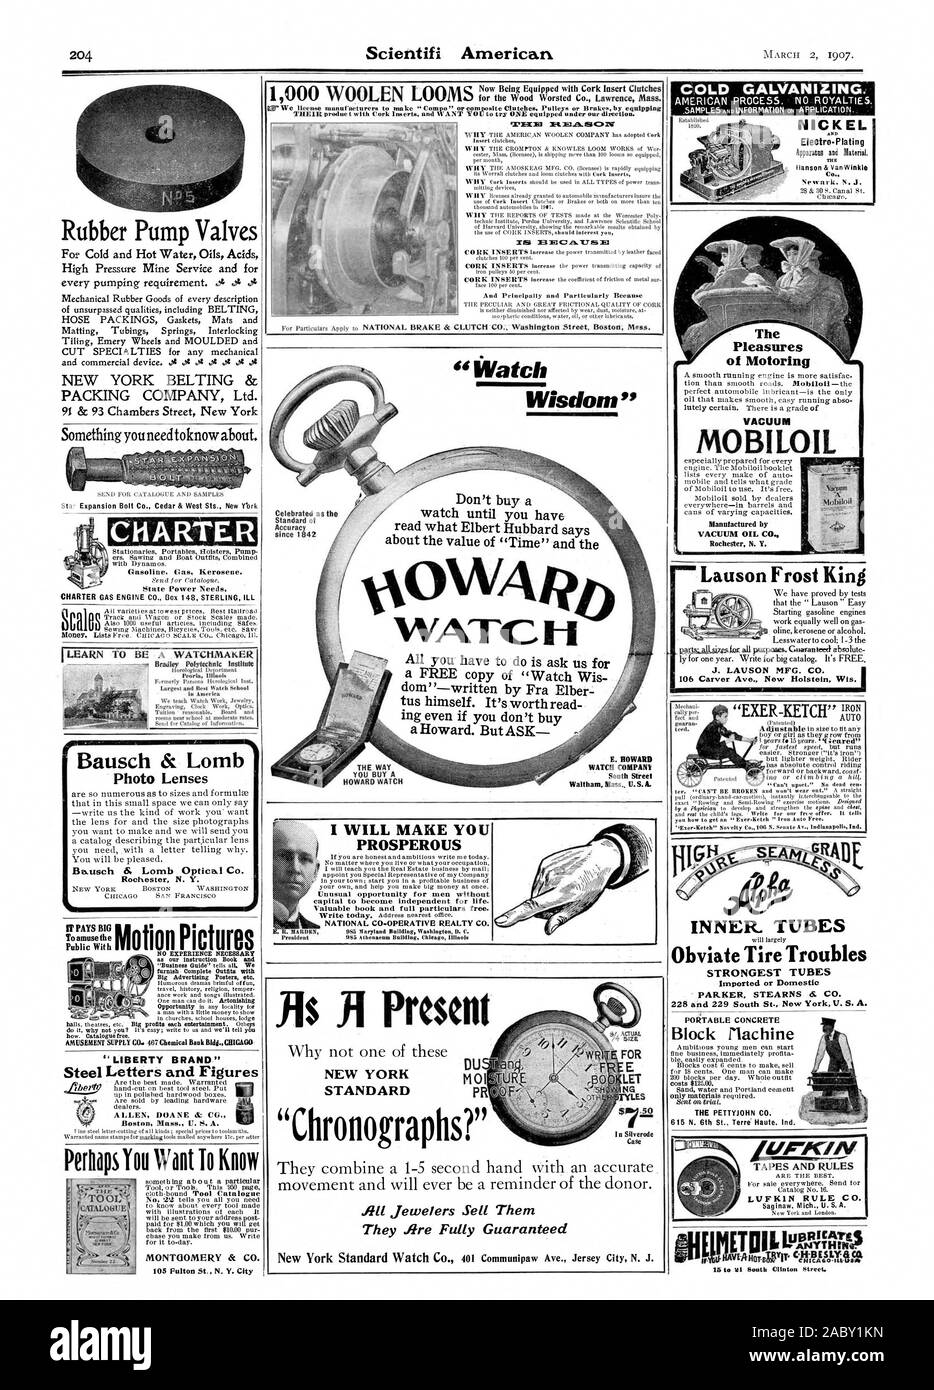 Cold Galvanizing Nickel And Hanson Van Winkle Co Watch Wisdom The Of Motoring Celebrated As Standard 01 Accuracy Don T Buy A Watch Until You Have Read What Elbert Hubbard Says About